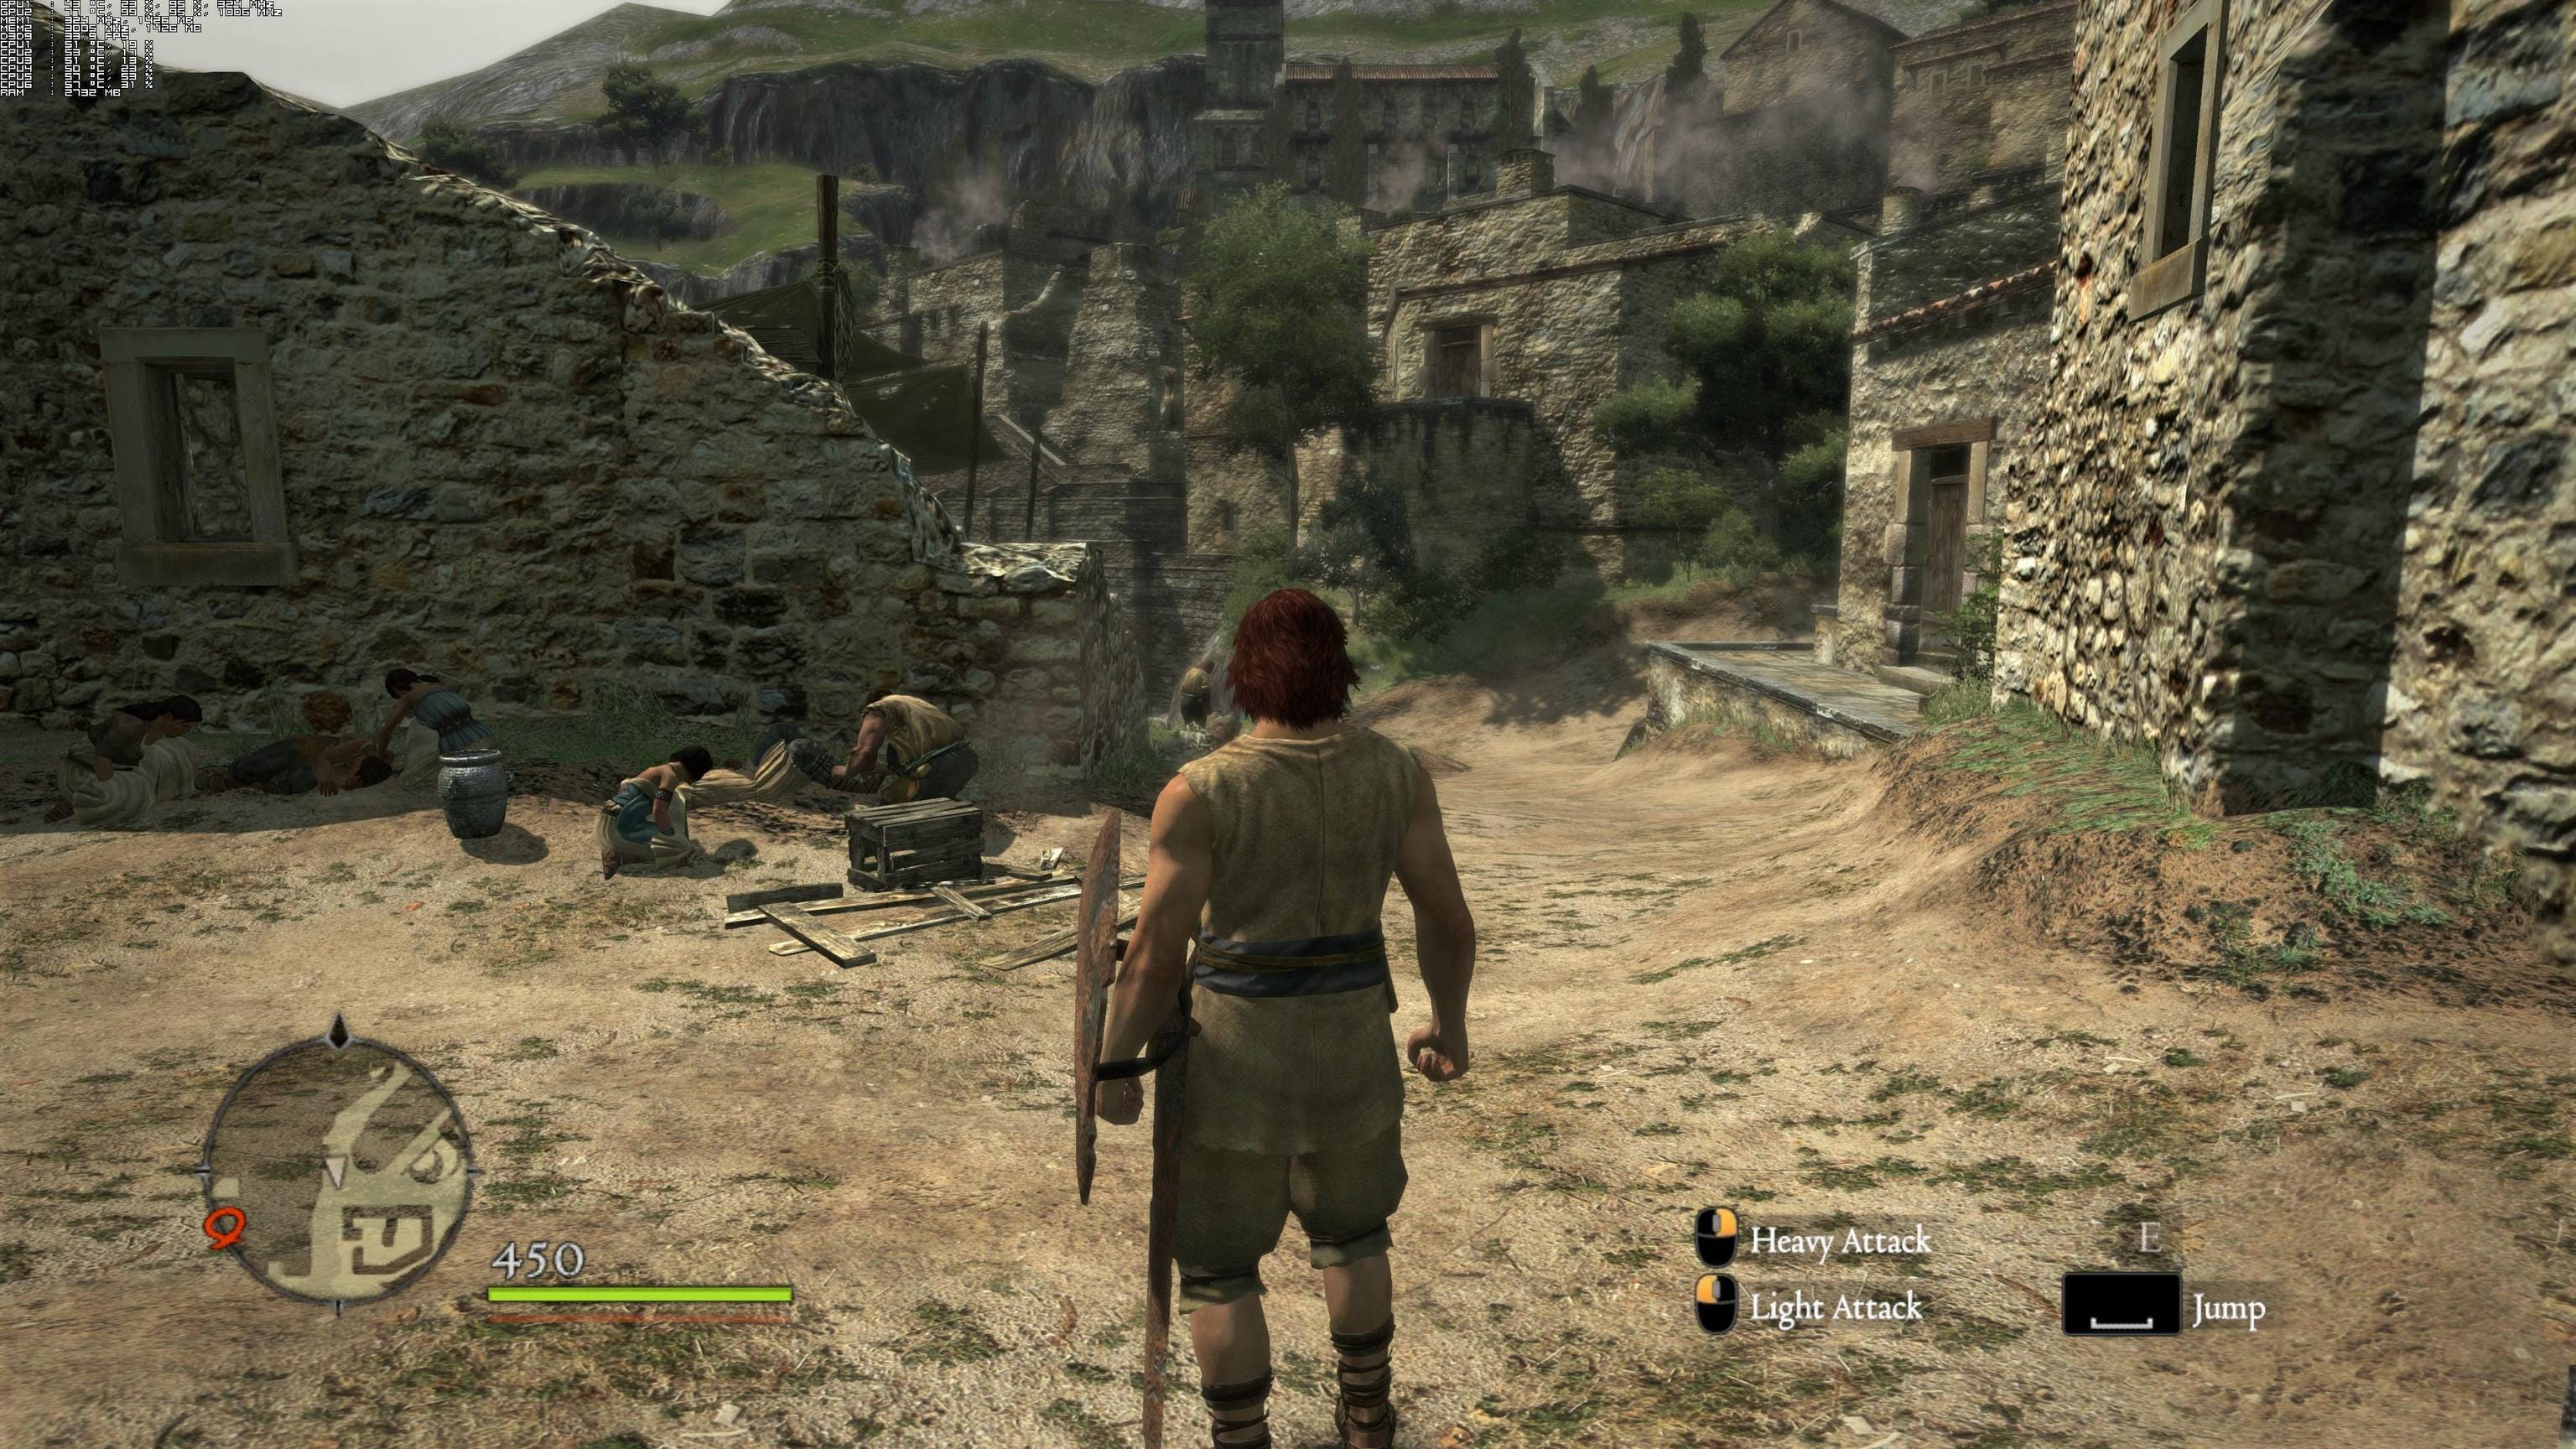 Dragon S Dogma Just Inches Away From Greatness By Jordan Sims Medium